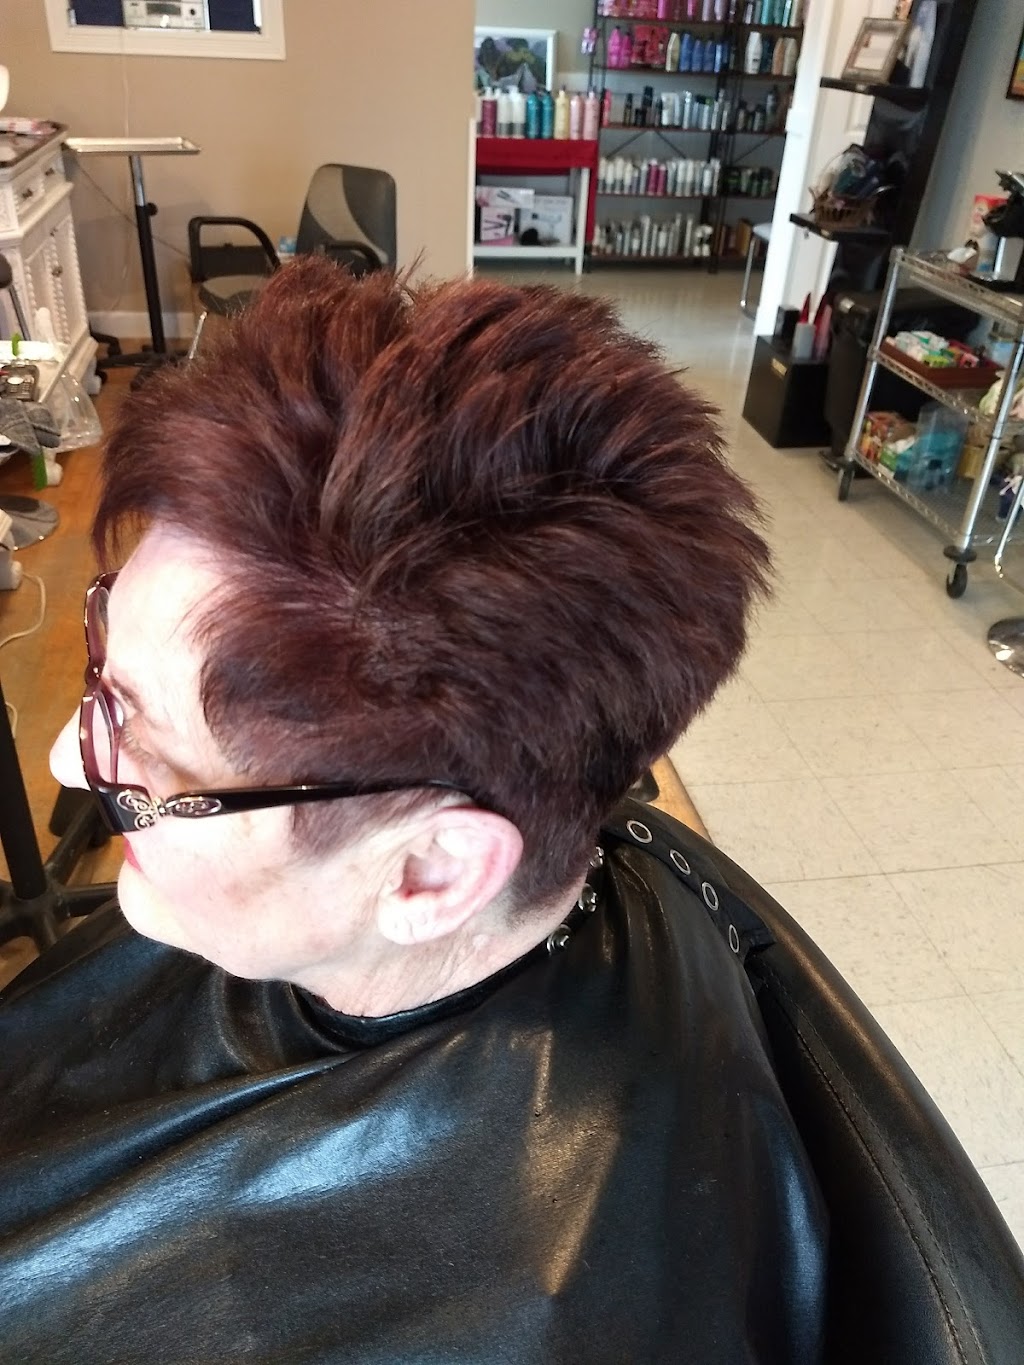 Faces Haircutters | Upstairs, 165 Washington Valley Rd # 1, Warren, NJ 07059 | Phone: (732) 469-0019